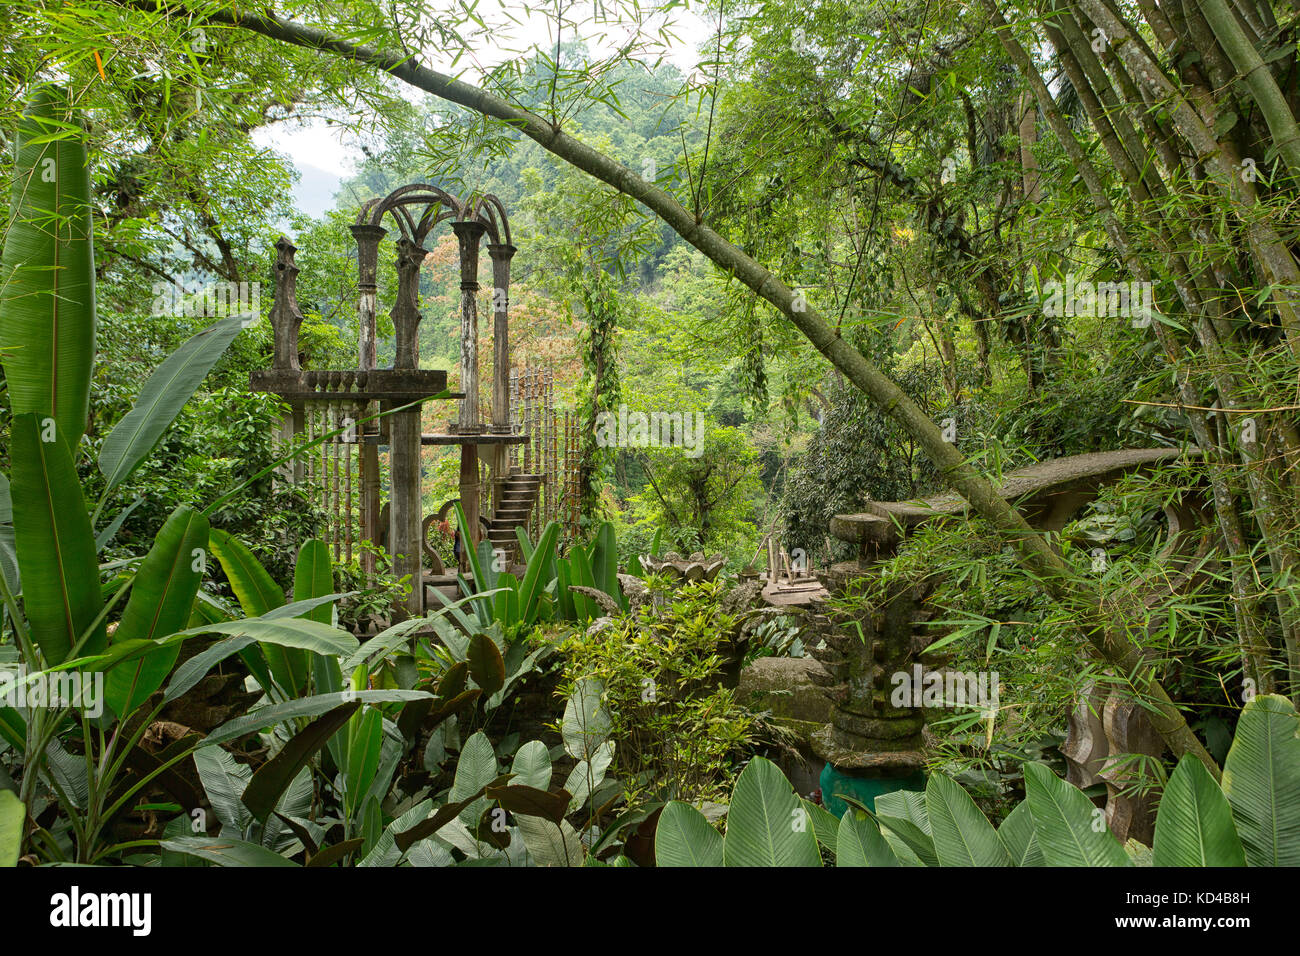 May 18, 2014 Xilitla, Mexico: Las Pozas also known as Edward James Gardens as well, with concrete structures in the most Northern jungle of the countr Stock Photo